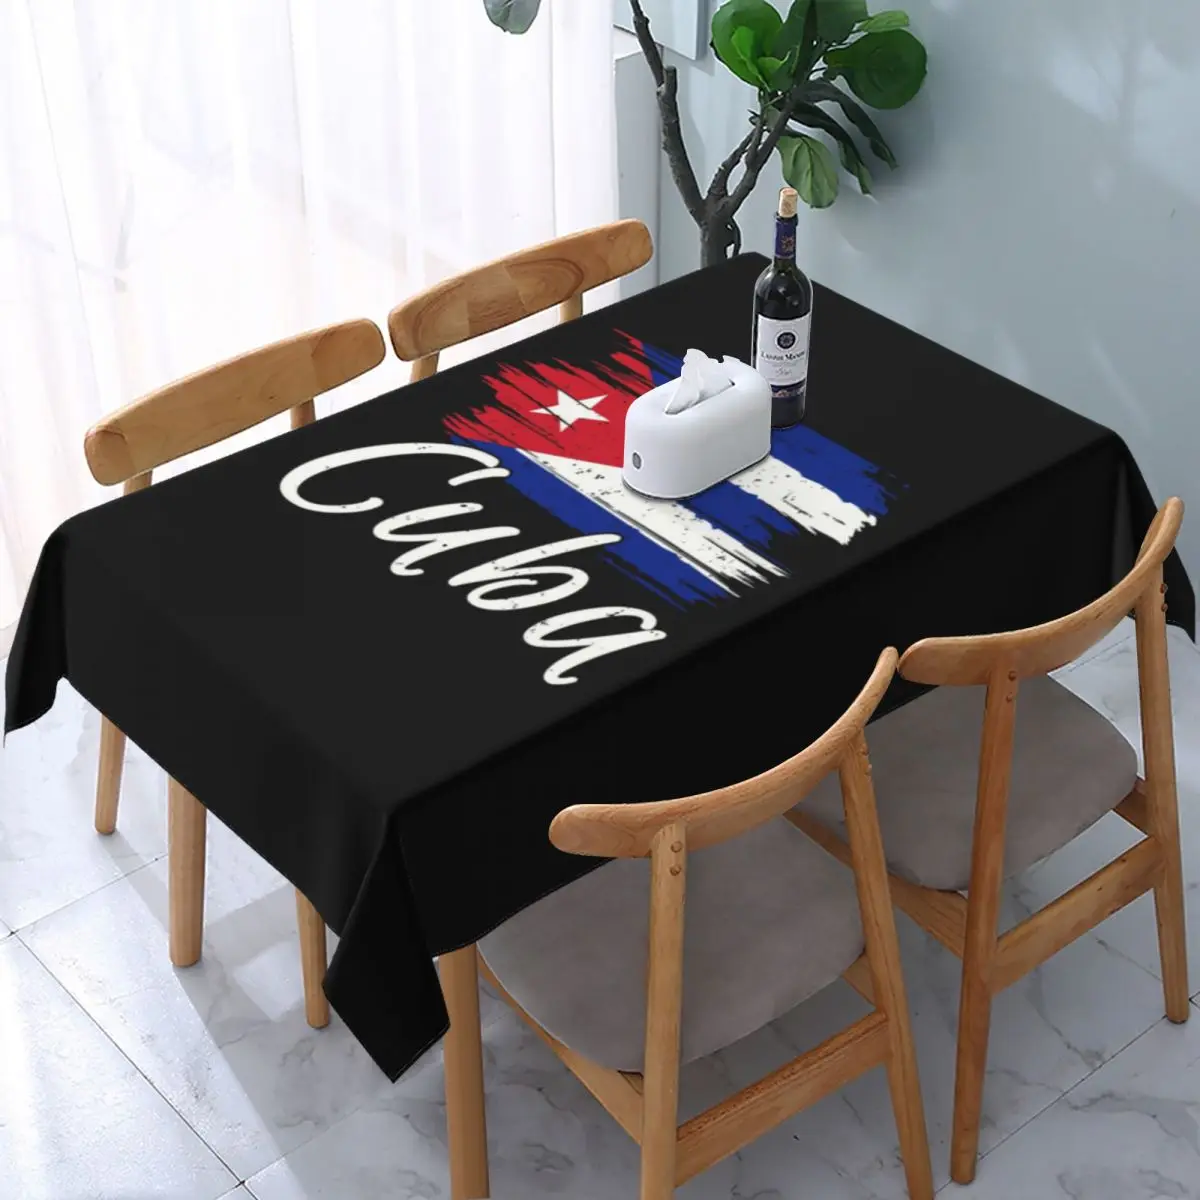 

Rectangular Fitted Cuba Cuban Havana Flag Table Cloth Waterproof Tablecloth 40"-44" Table Cover Backed with Elastic Edge